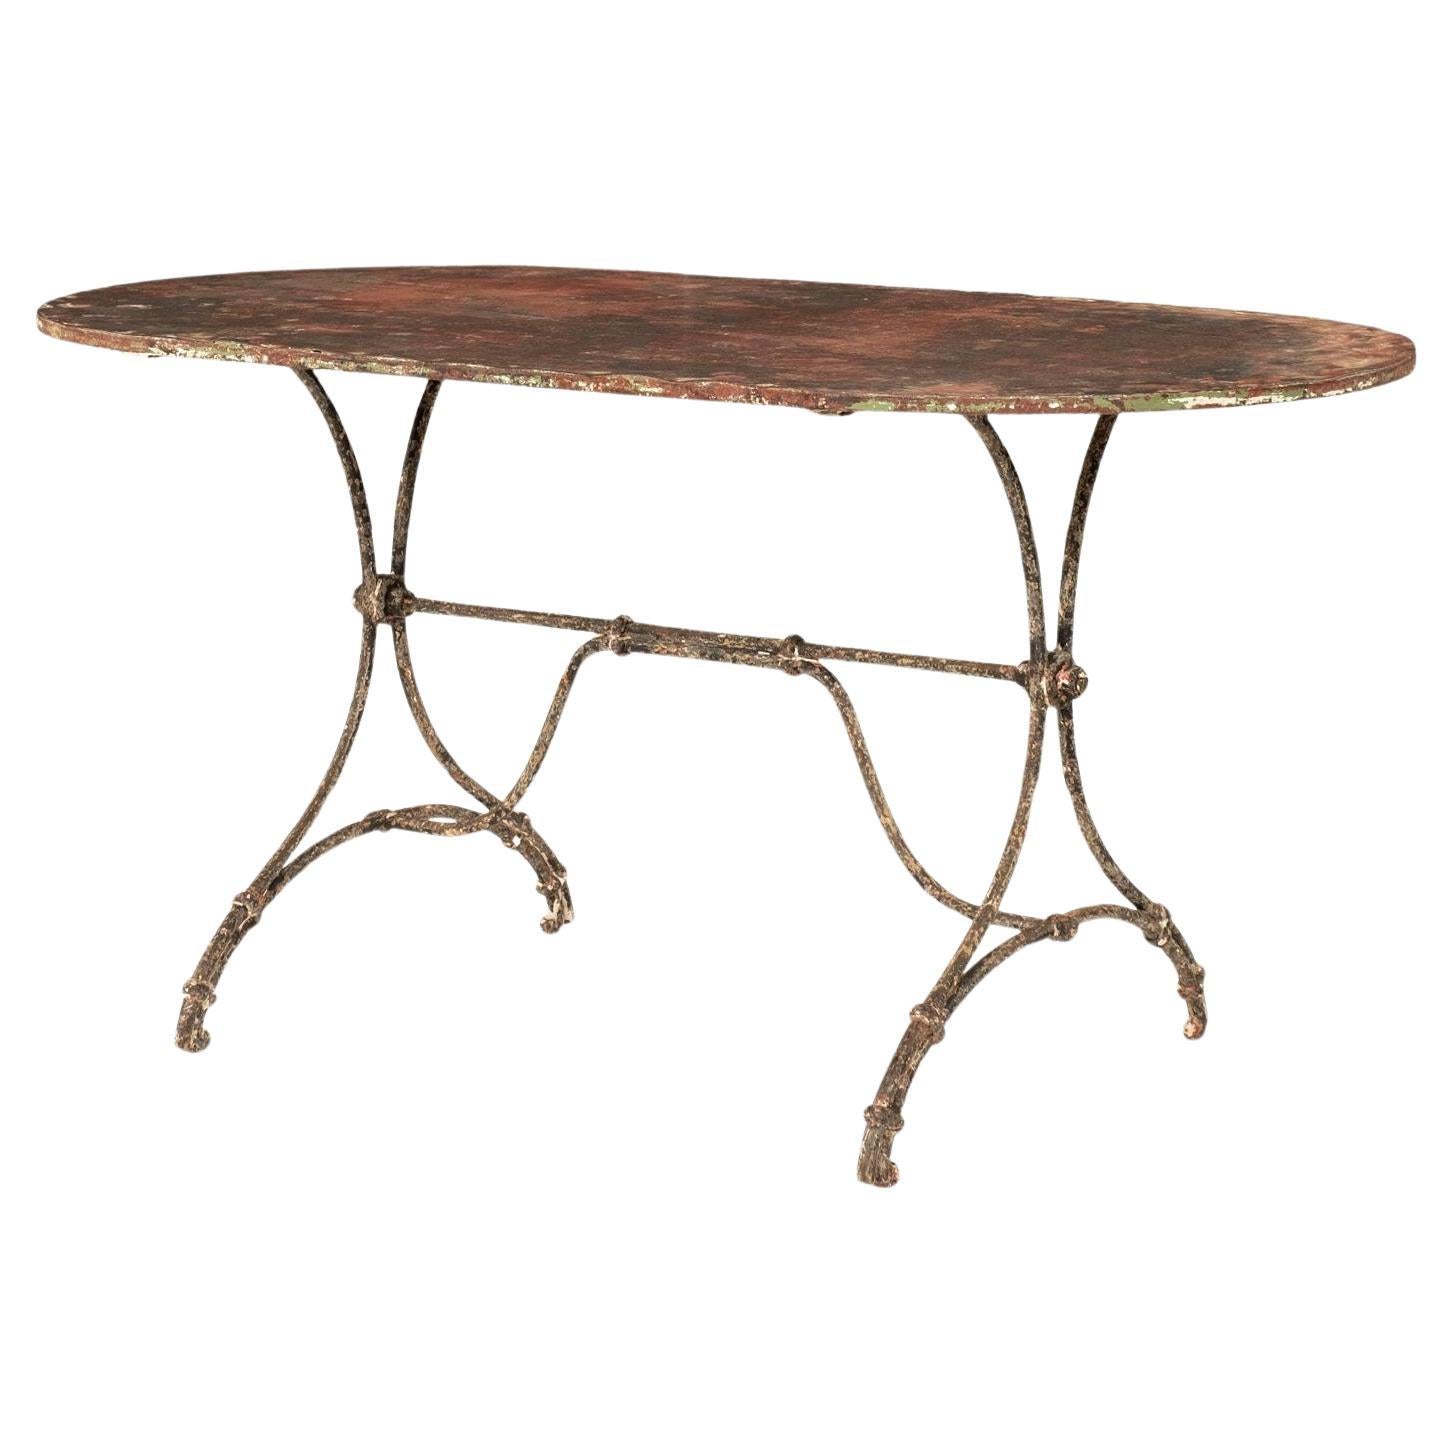 Large Oval-Shaped Red and Green Painted French Garden Table